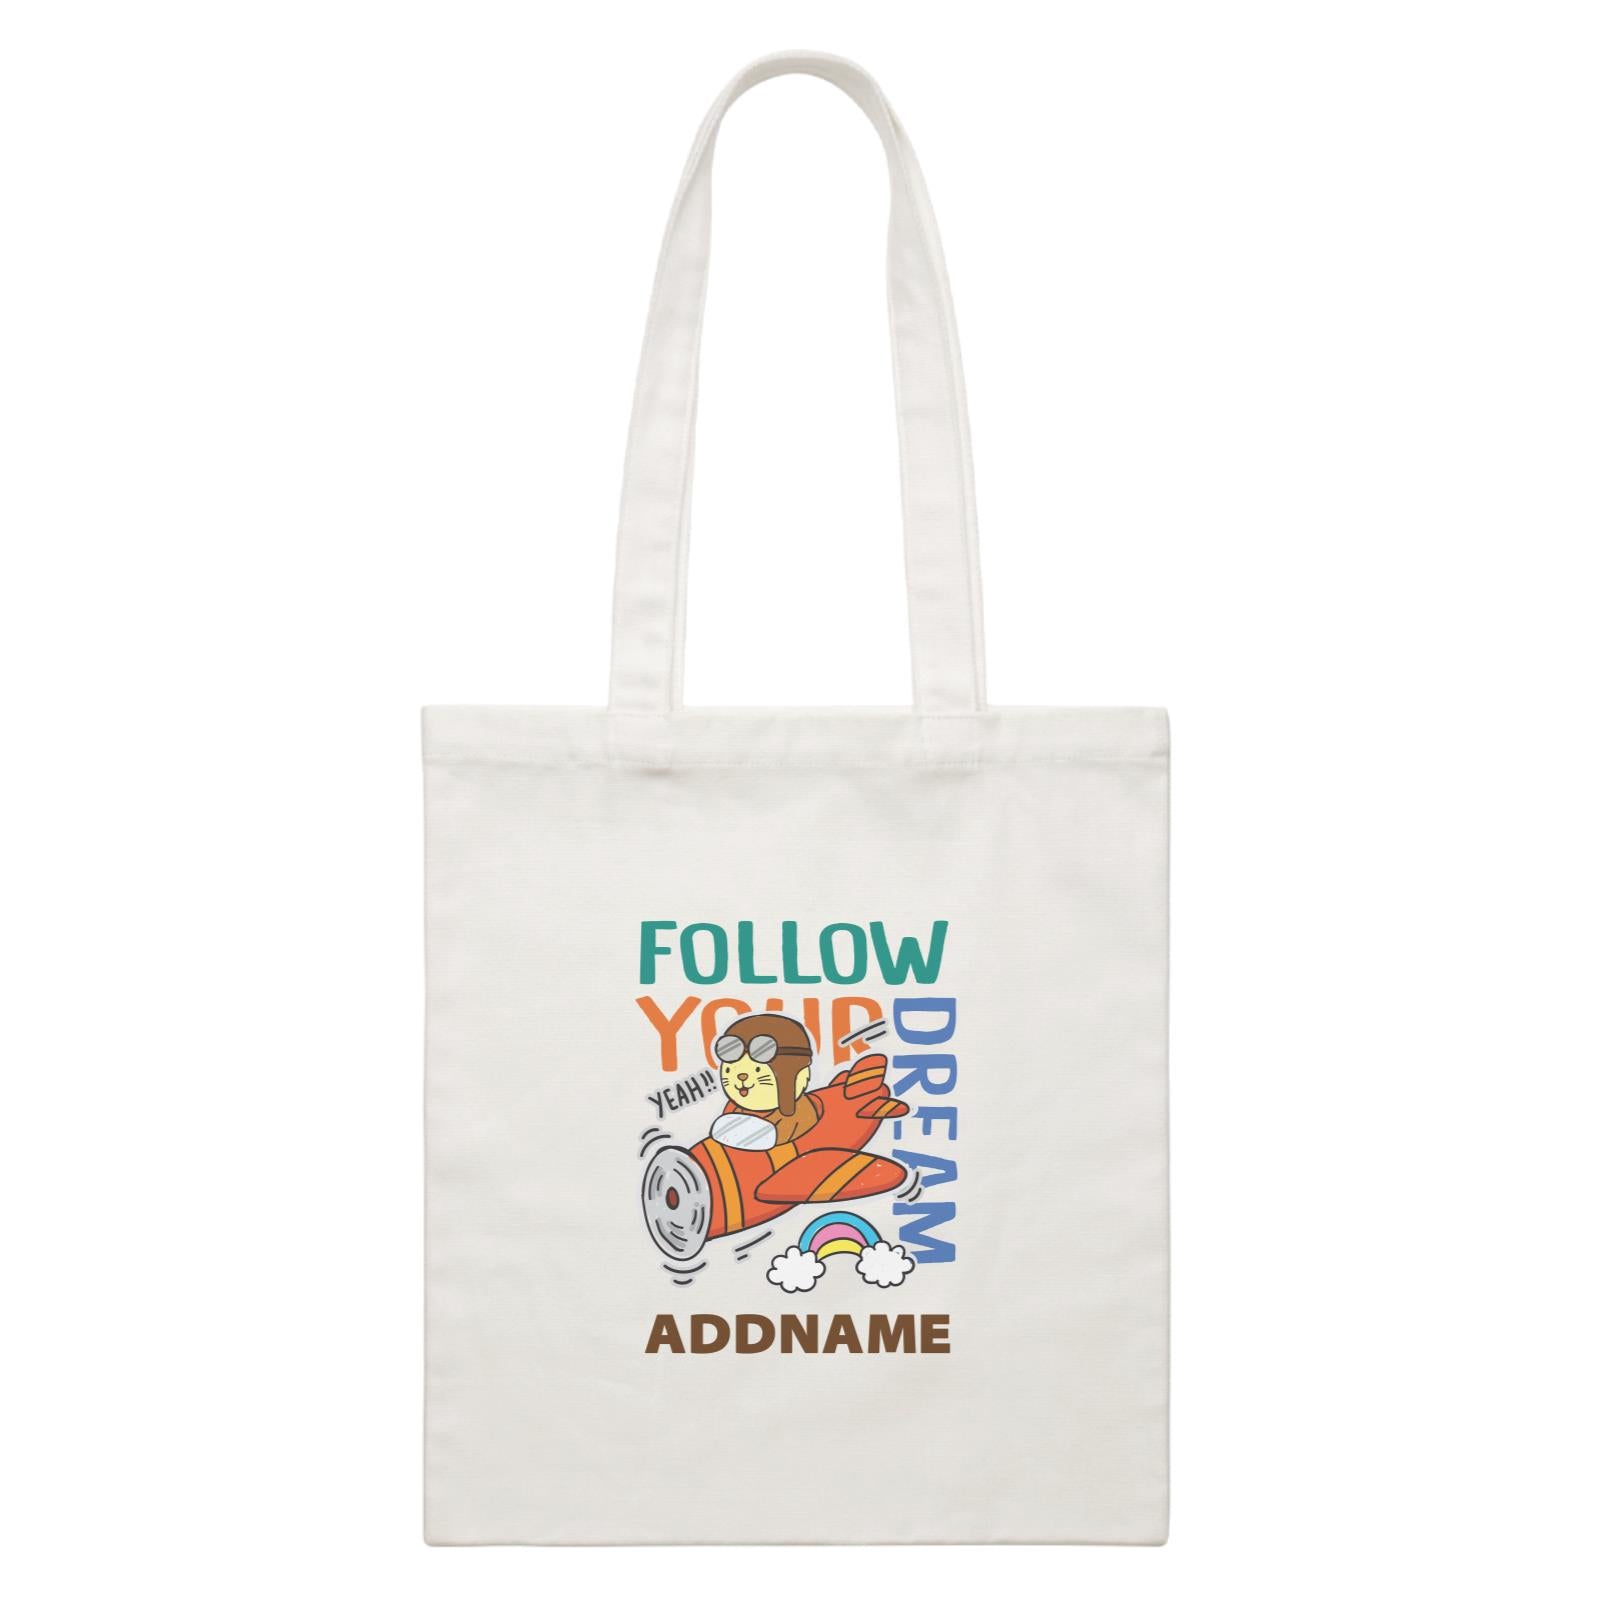 Cool Cute Animals Cats Follow Your Dream Addname White Canvas Bag